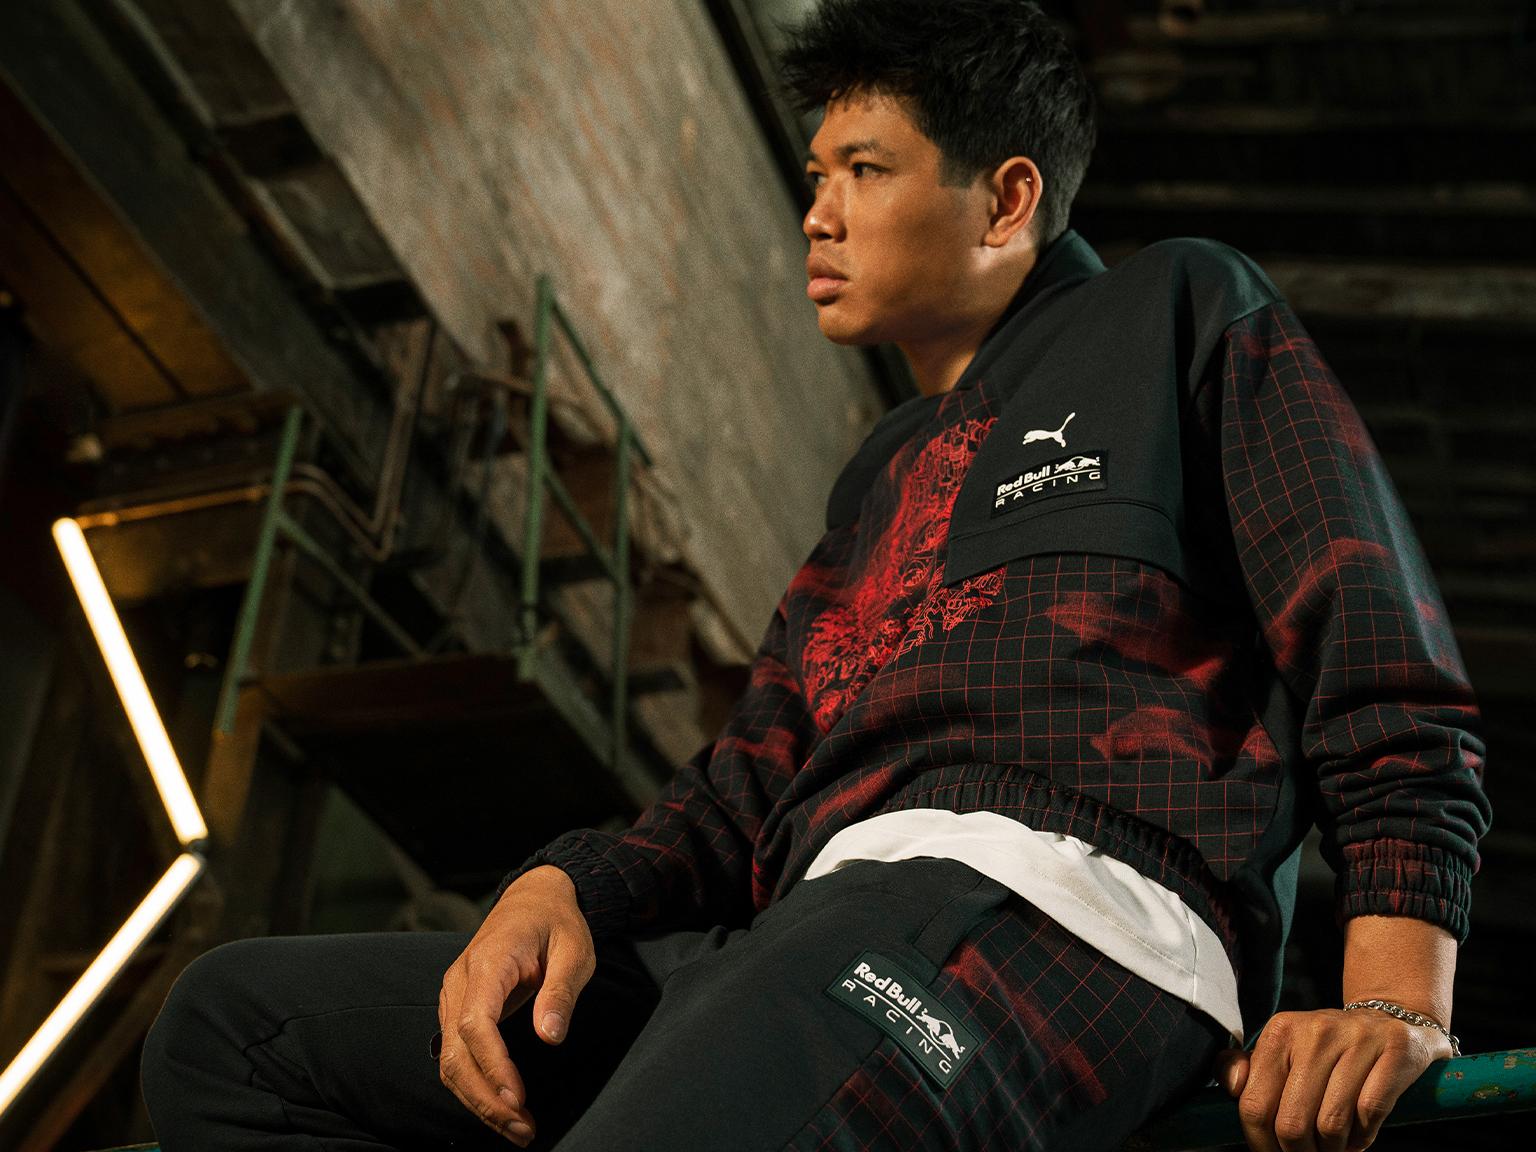 PUMA blends Motorsport inspirations and lifestyle approach with